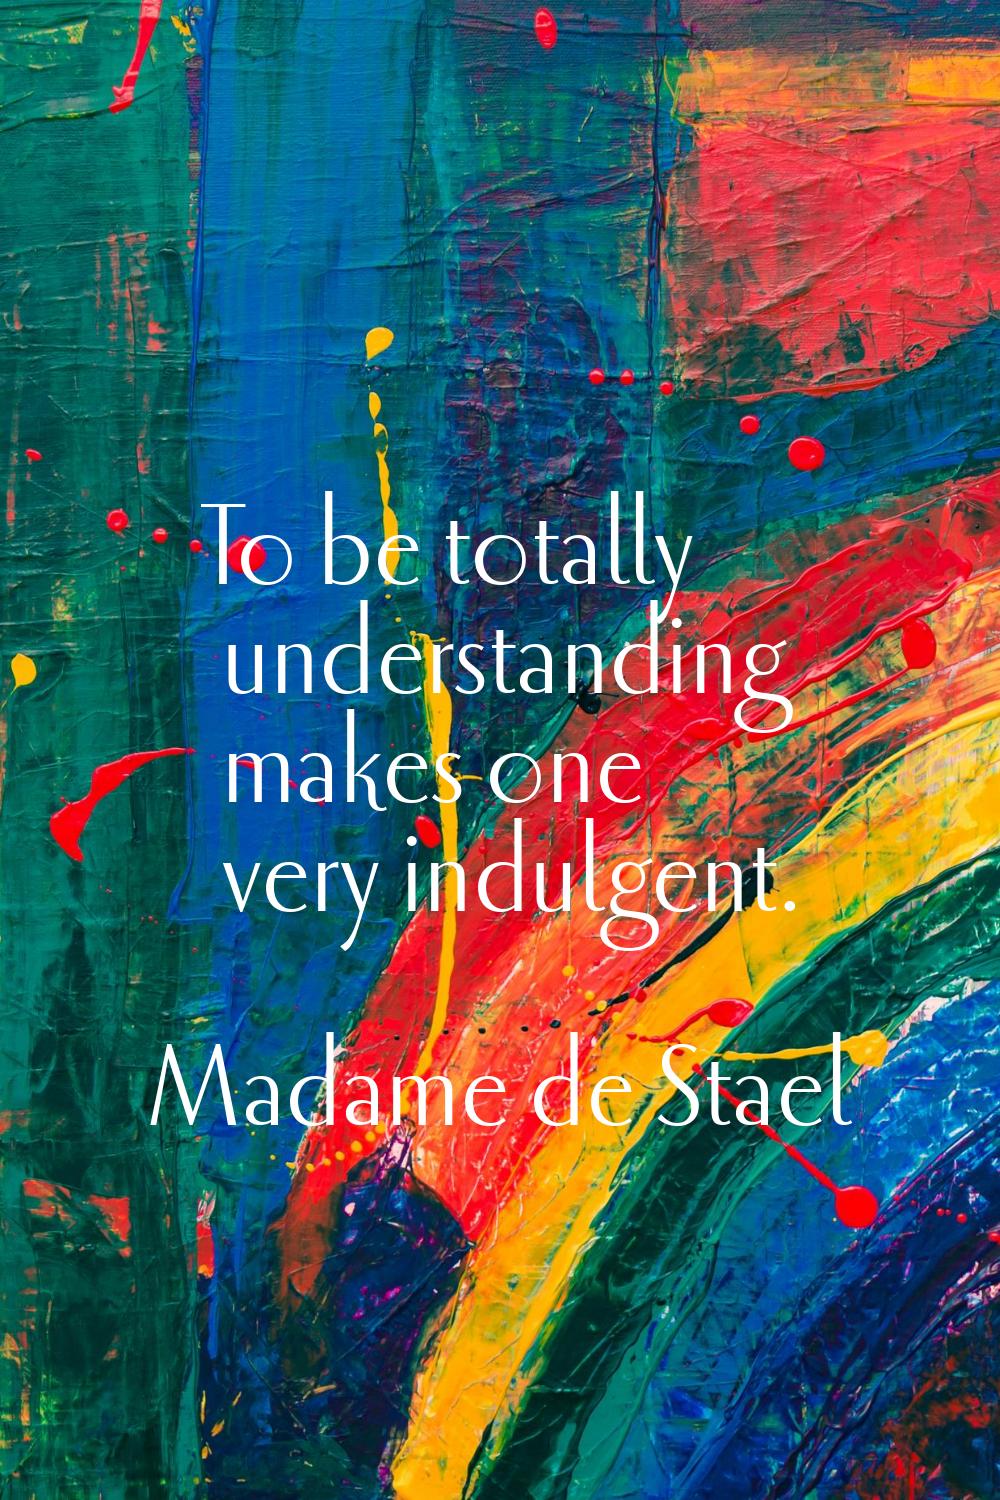 To be totally understanding makes one very indulgent.